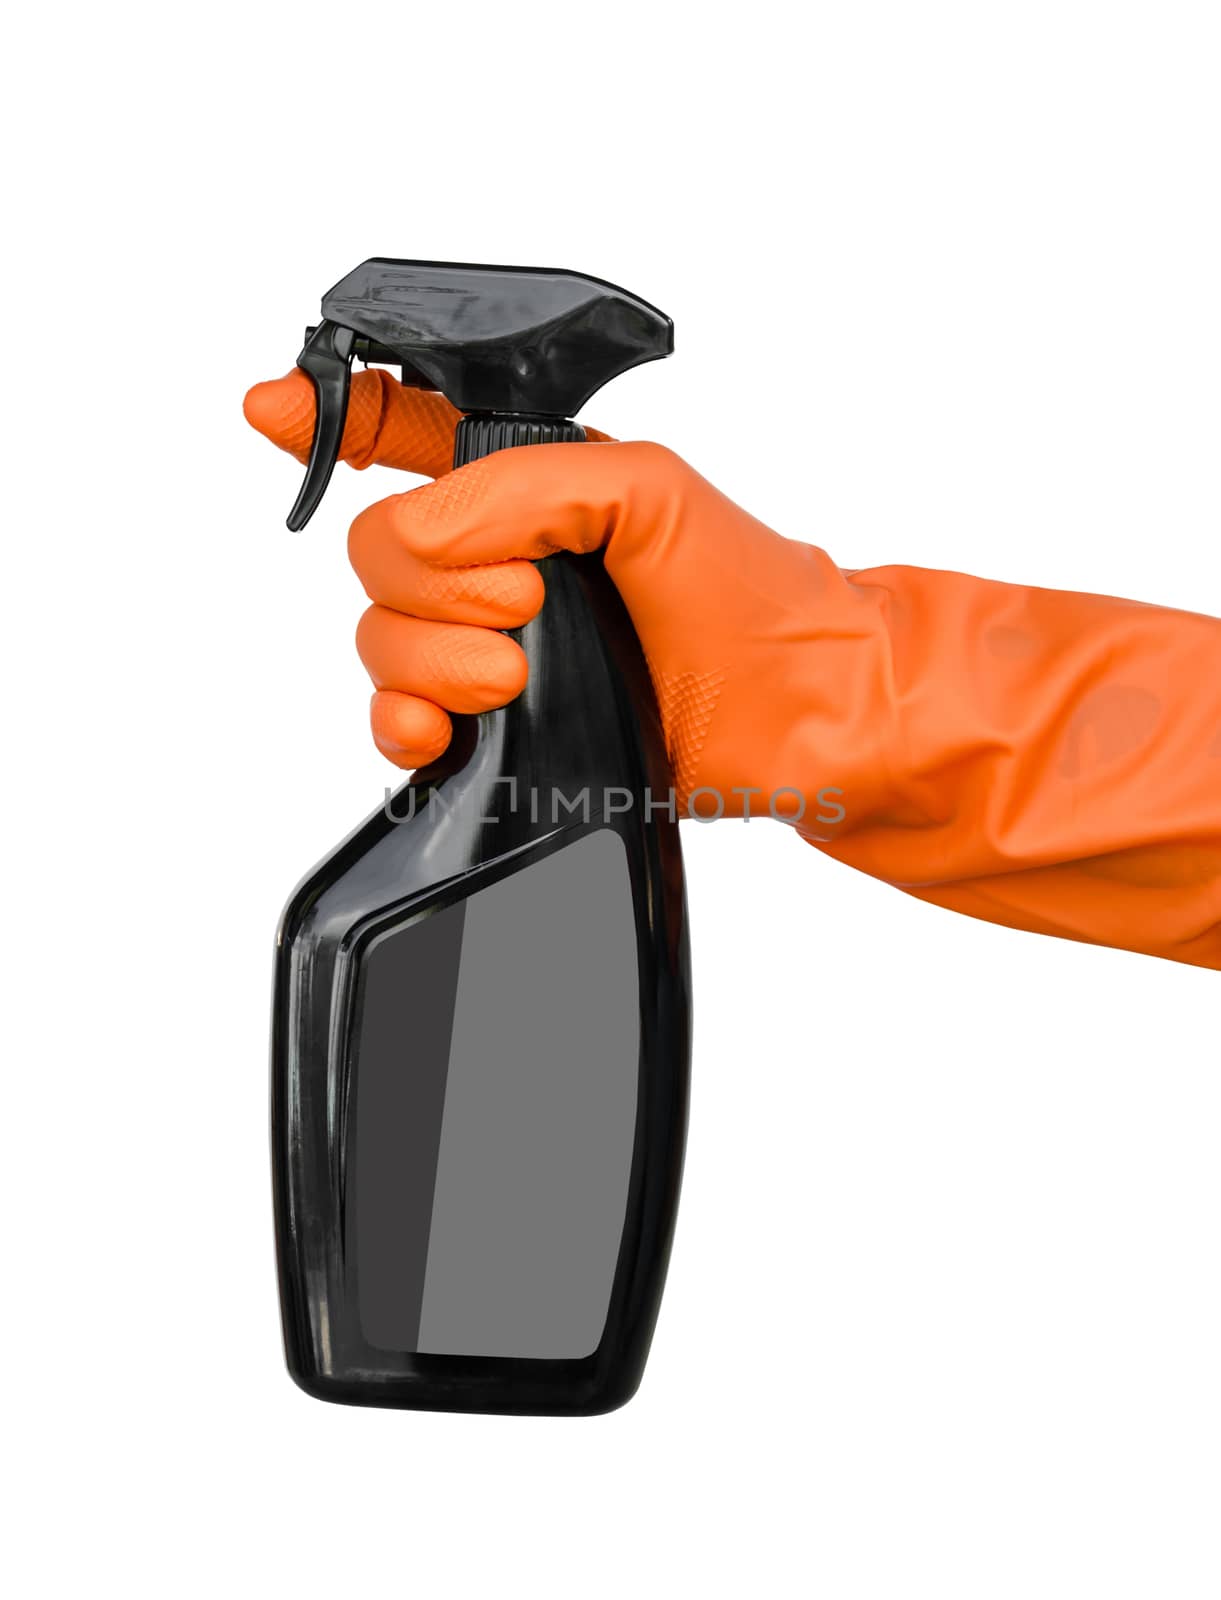 Hand in gloves holds black color spray bottle. Isolated on a white background. Save clipping path.